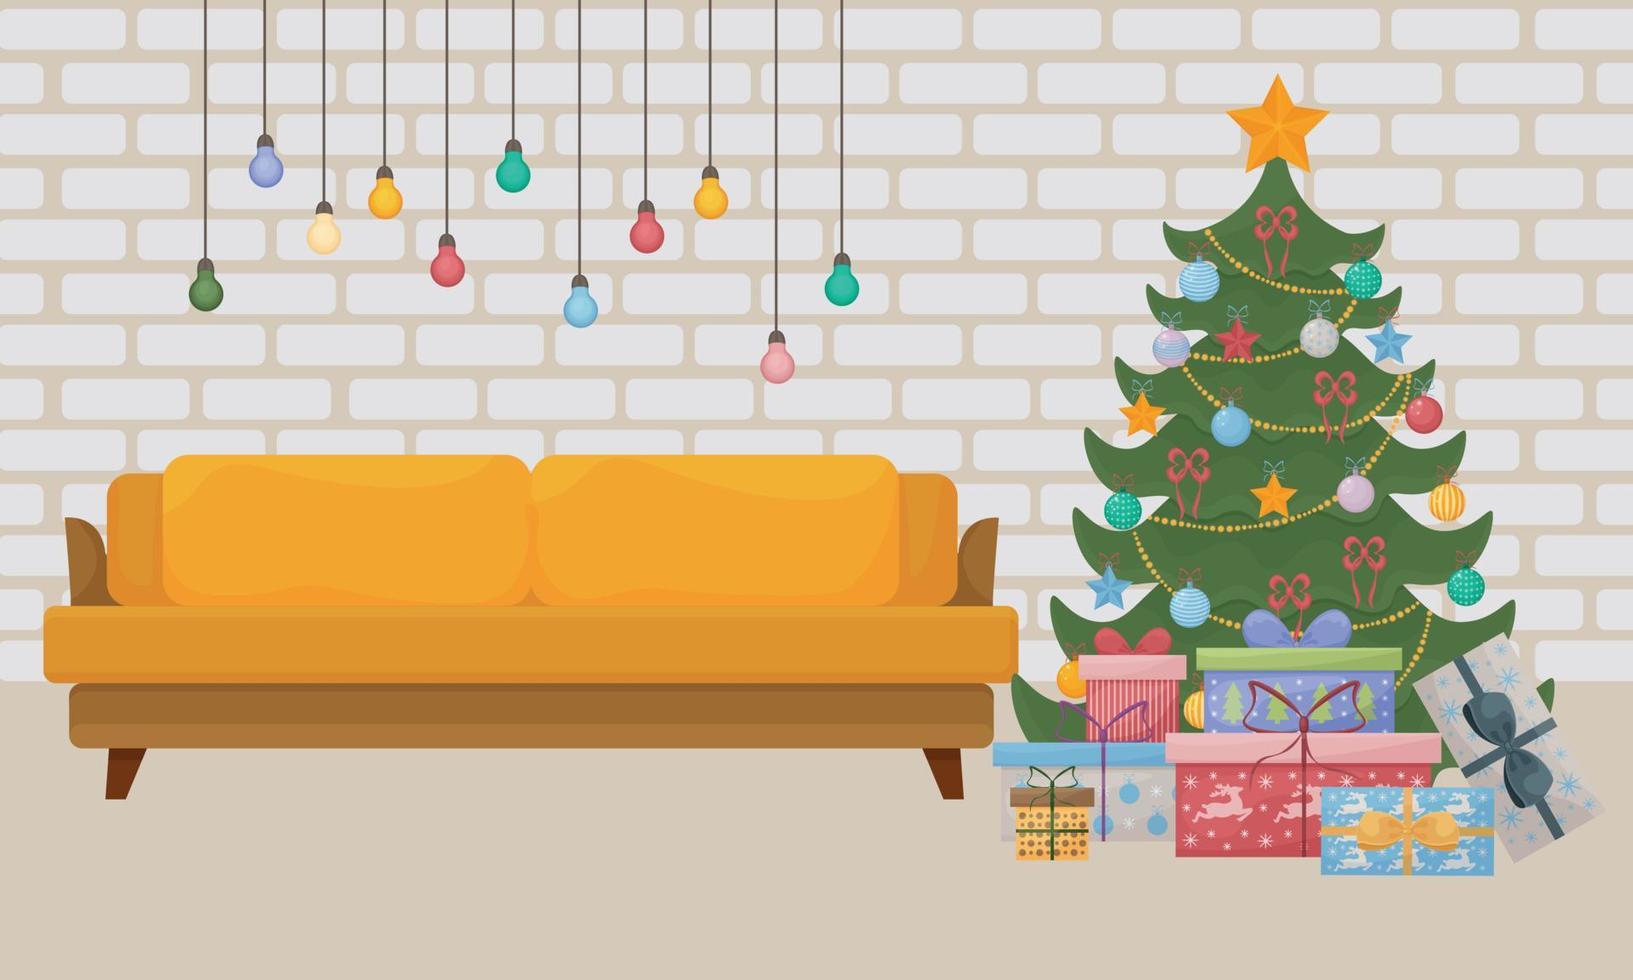 A bright illustration depicting the Christmas interior. New Year s living room with a Christmas tree, gifts, a bright sofa and also colorful garlands. Vector illustration